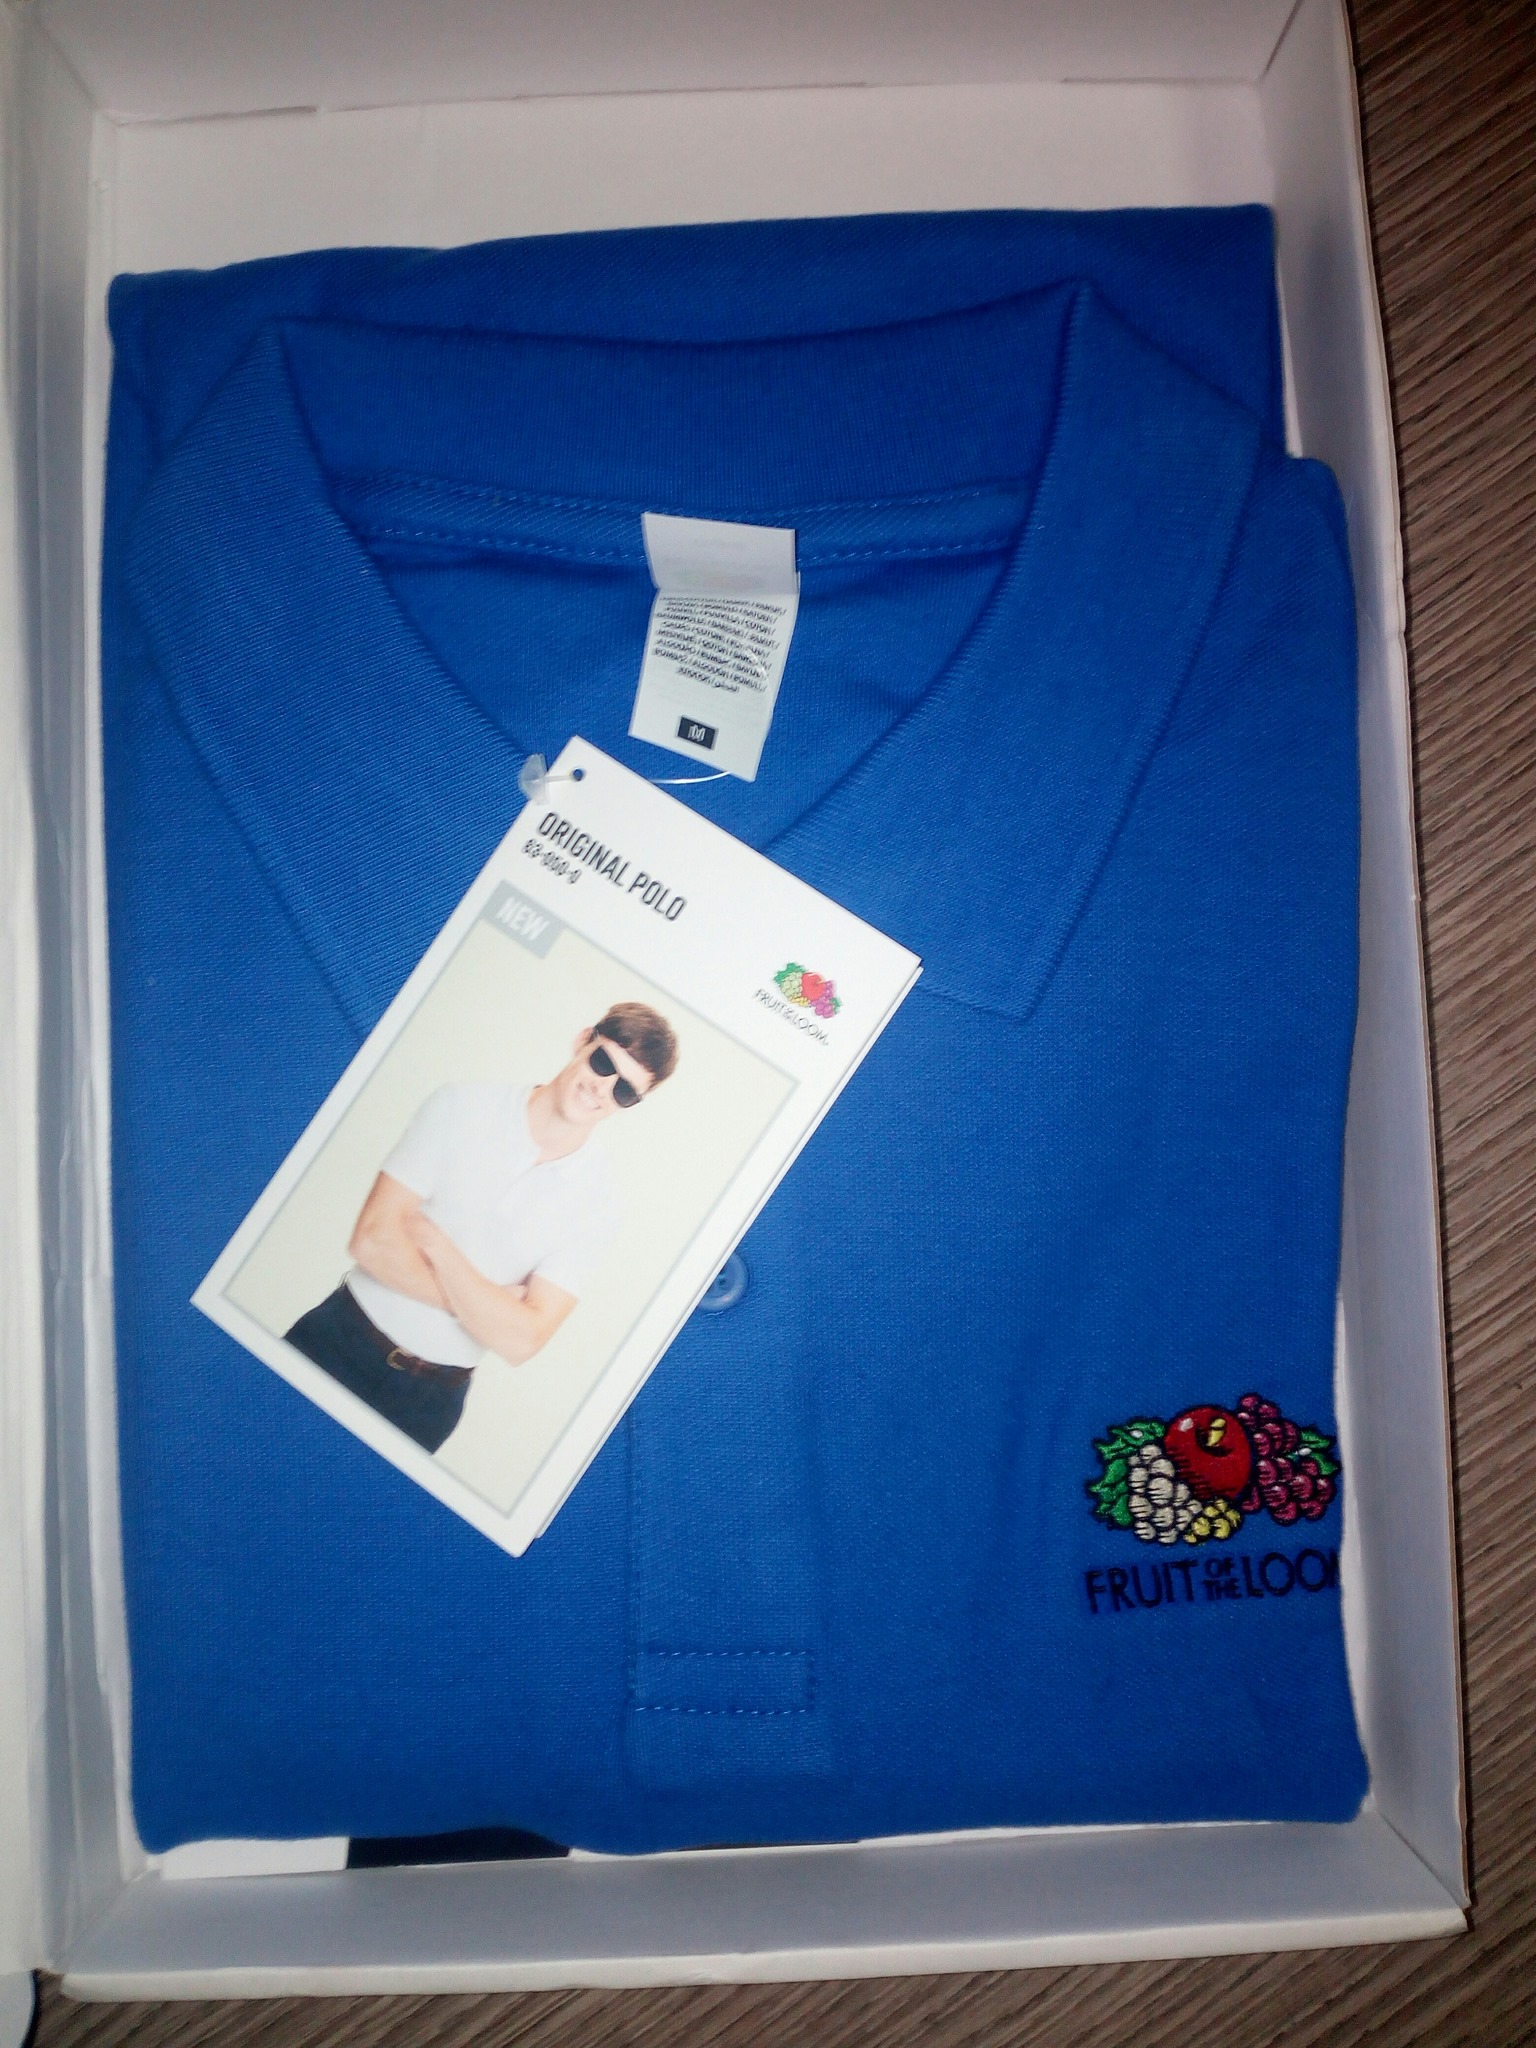 In Arrivo le Polo Fruit of The Loom Gratis!